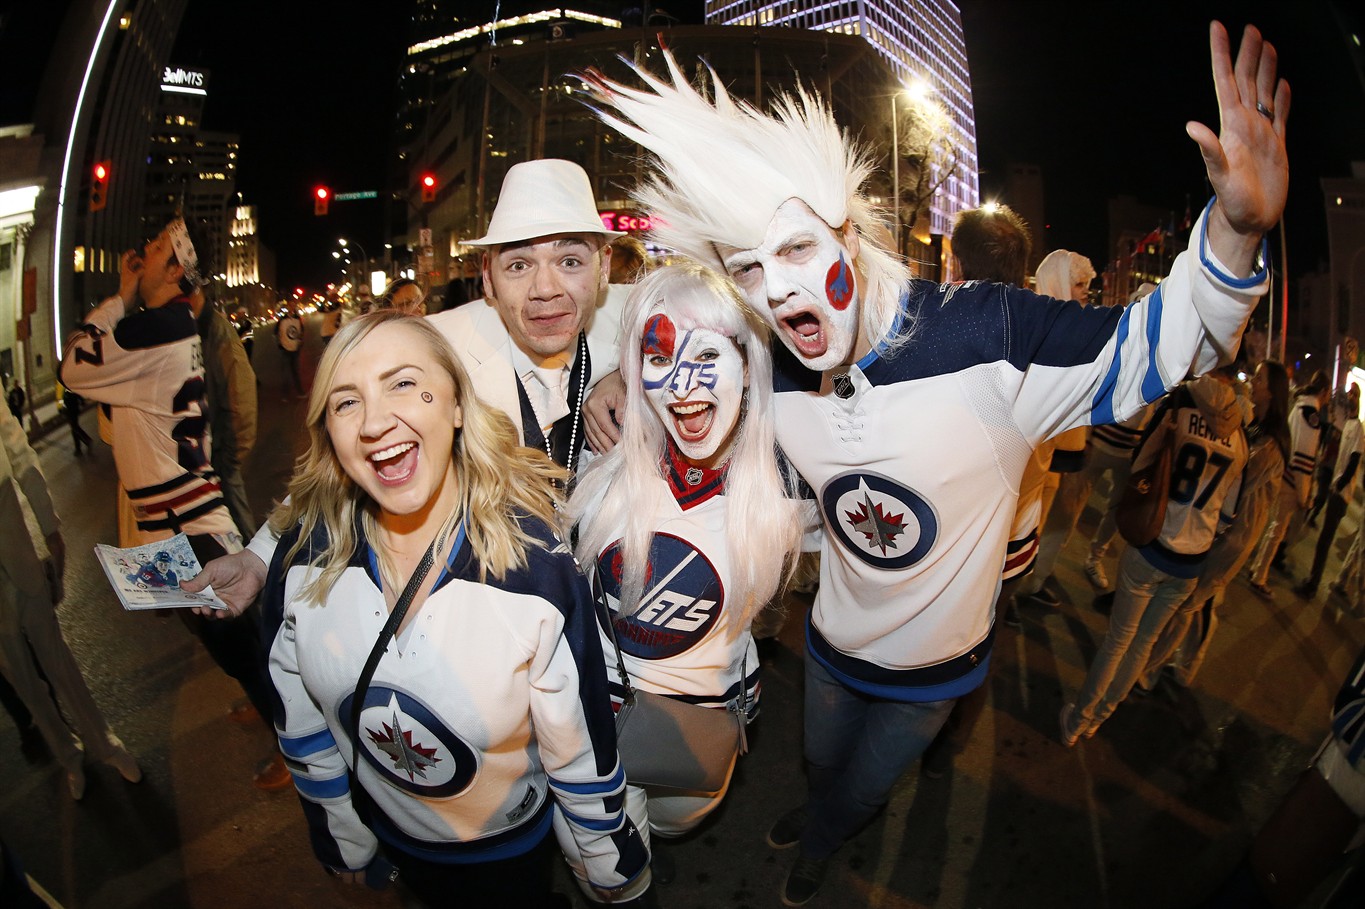 Winnipeg Jets release 2022-23 pre-season schedule, along with Dale  Hawerchuk statue unveiling date